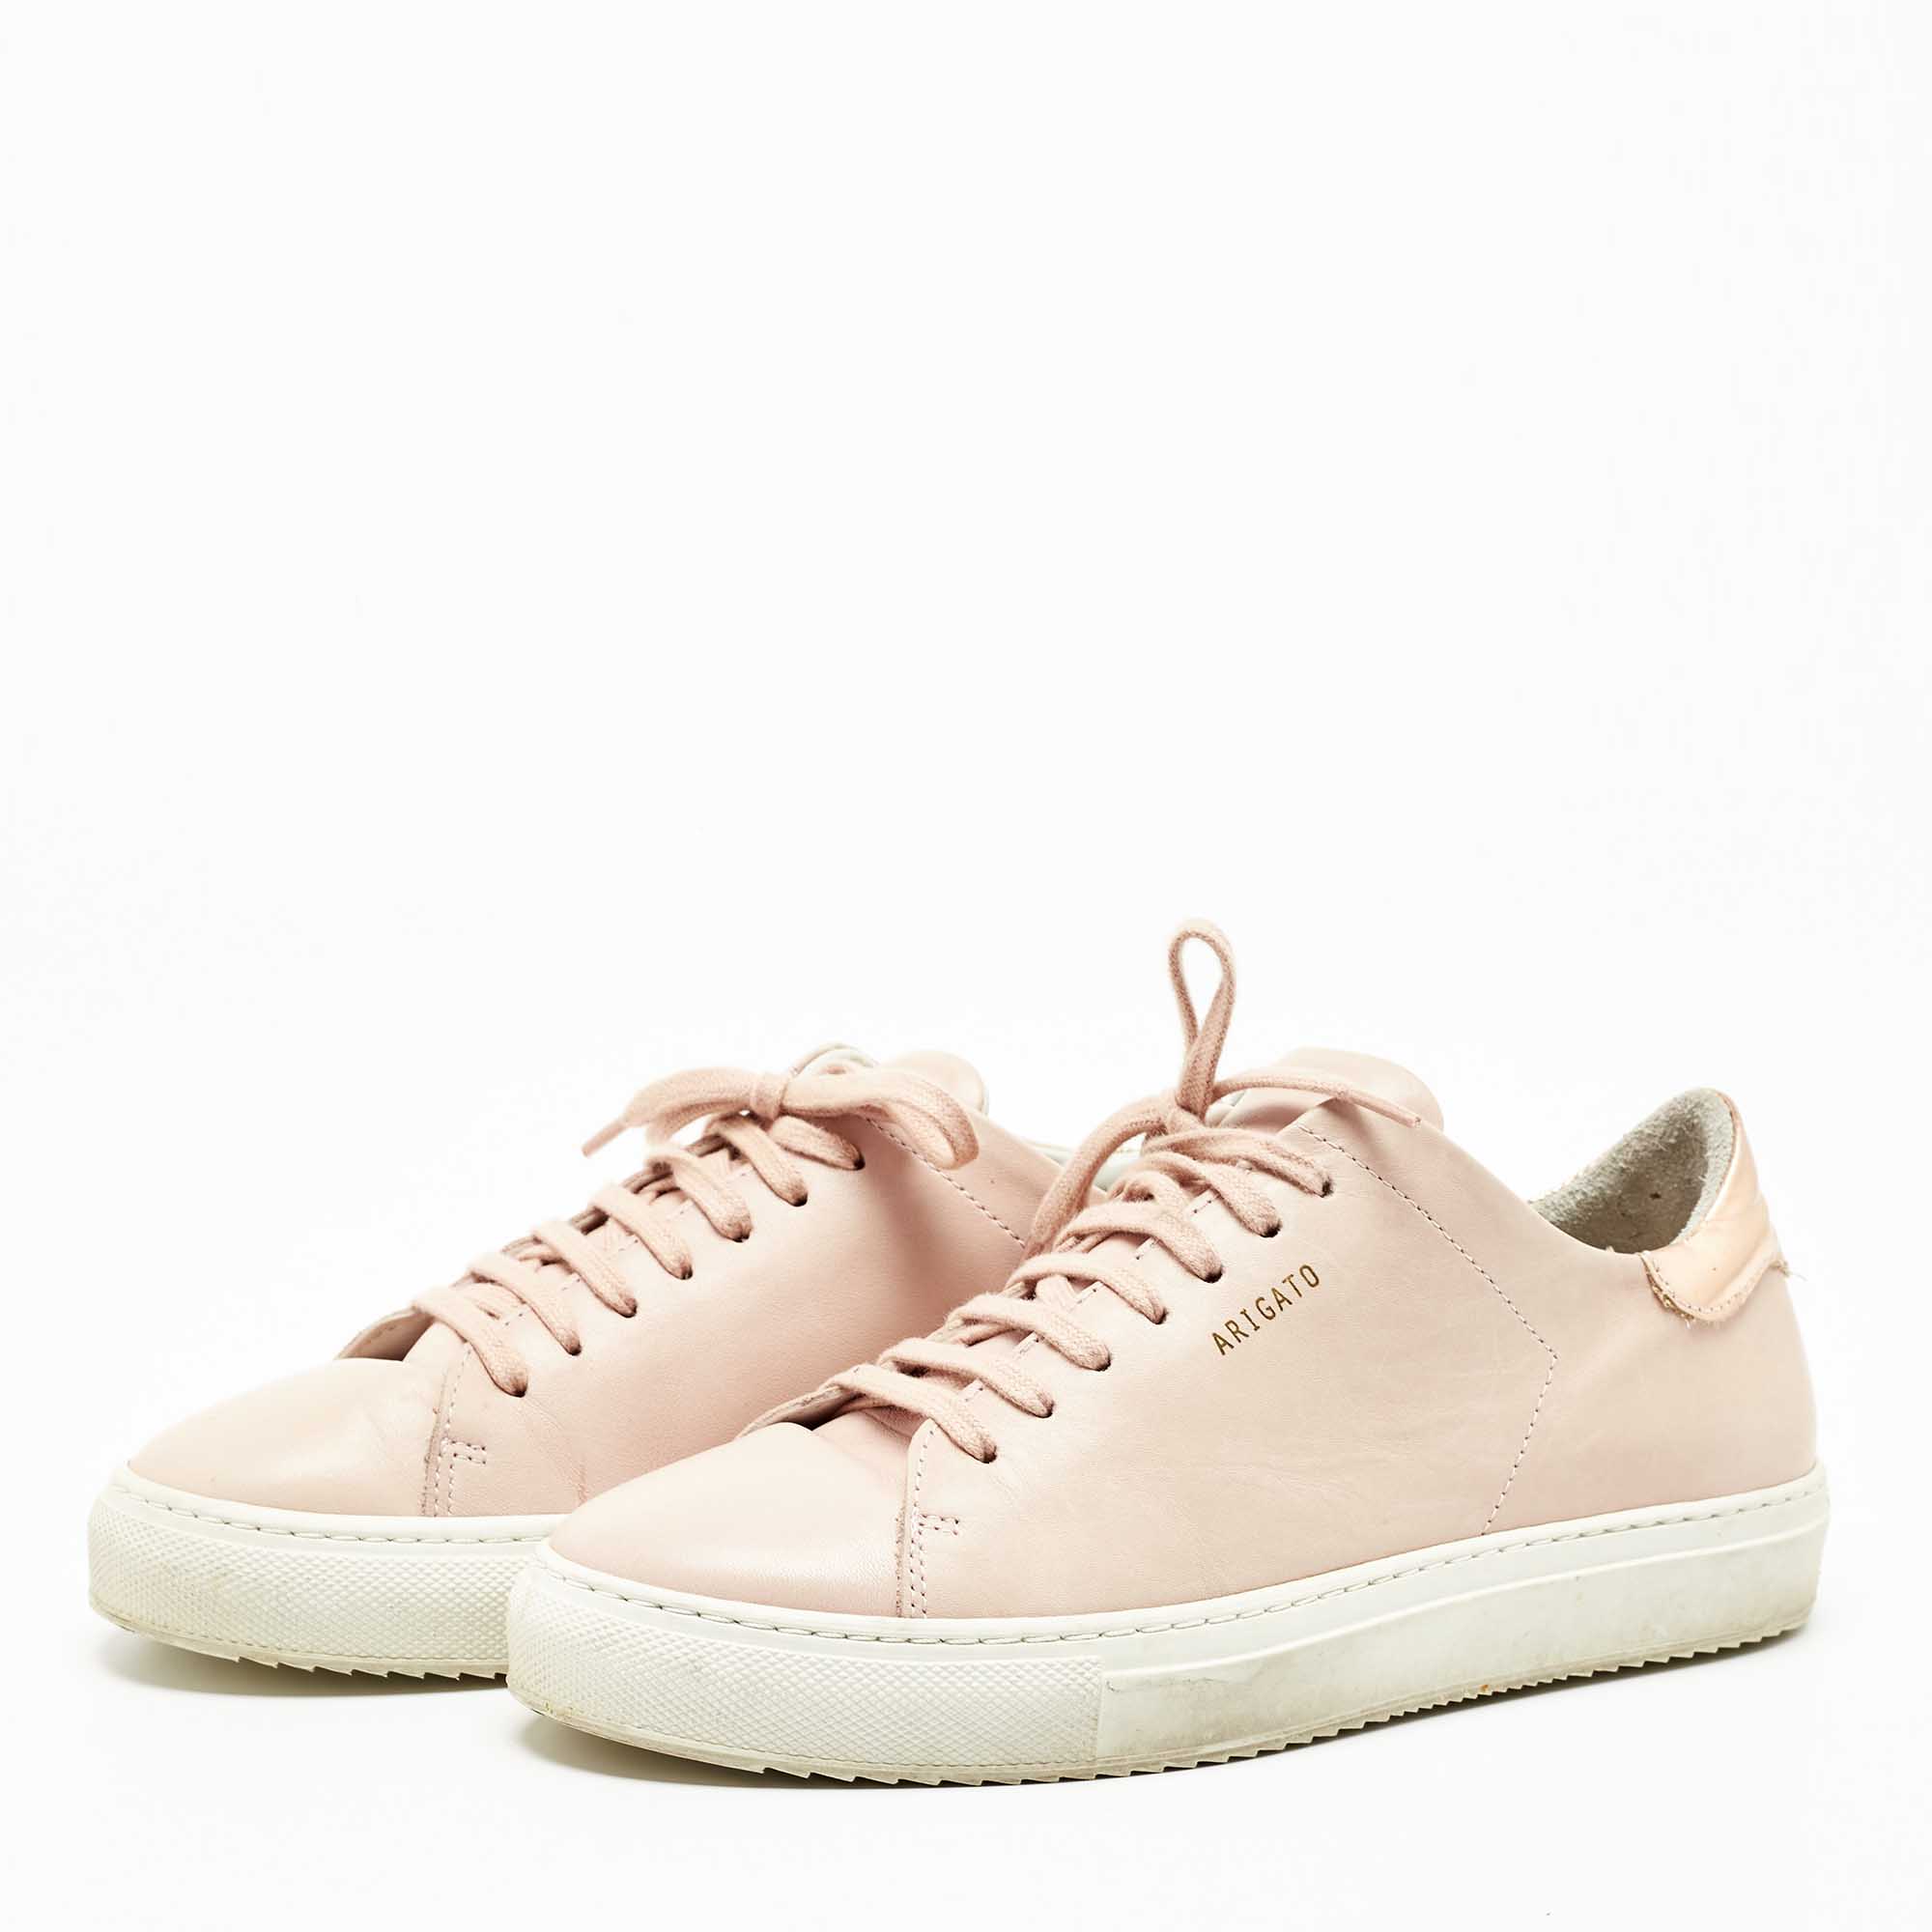 

Axel Arigato Light Beige Leather And Suede Low Top Sneakers Size